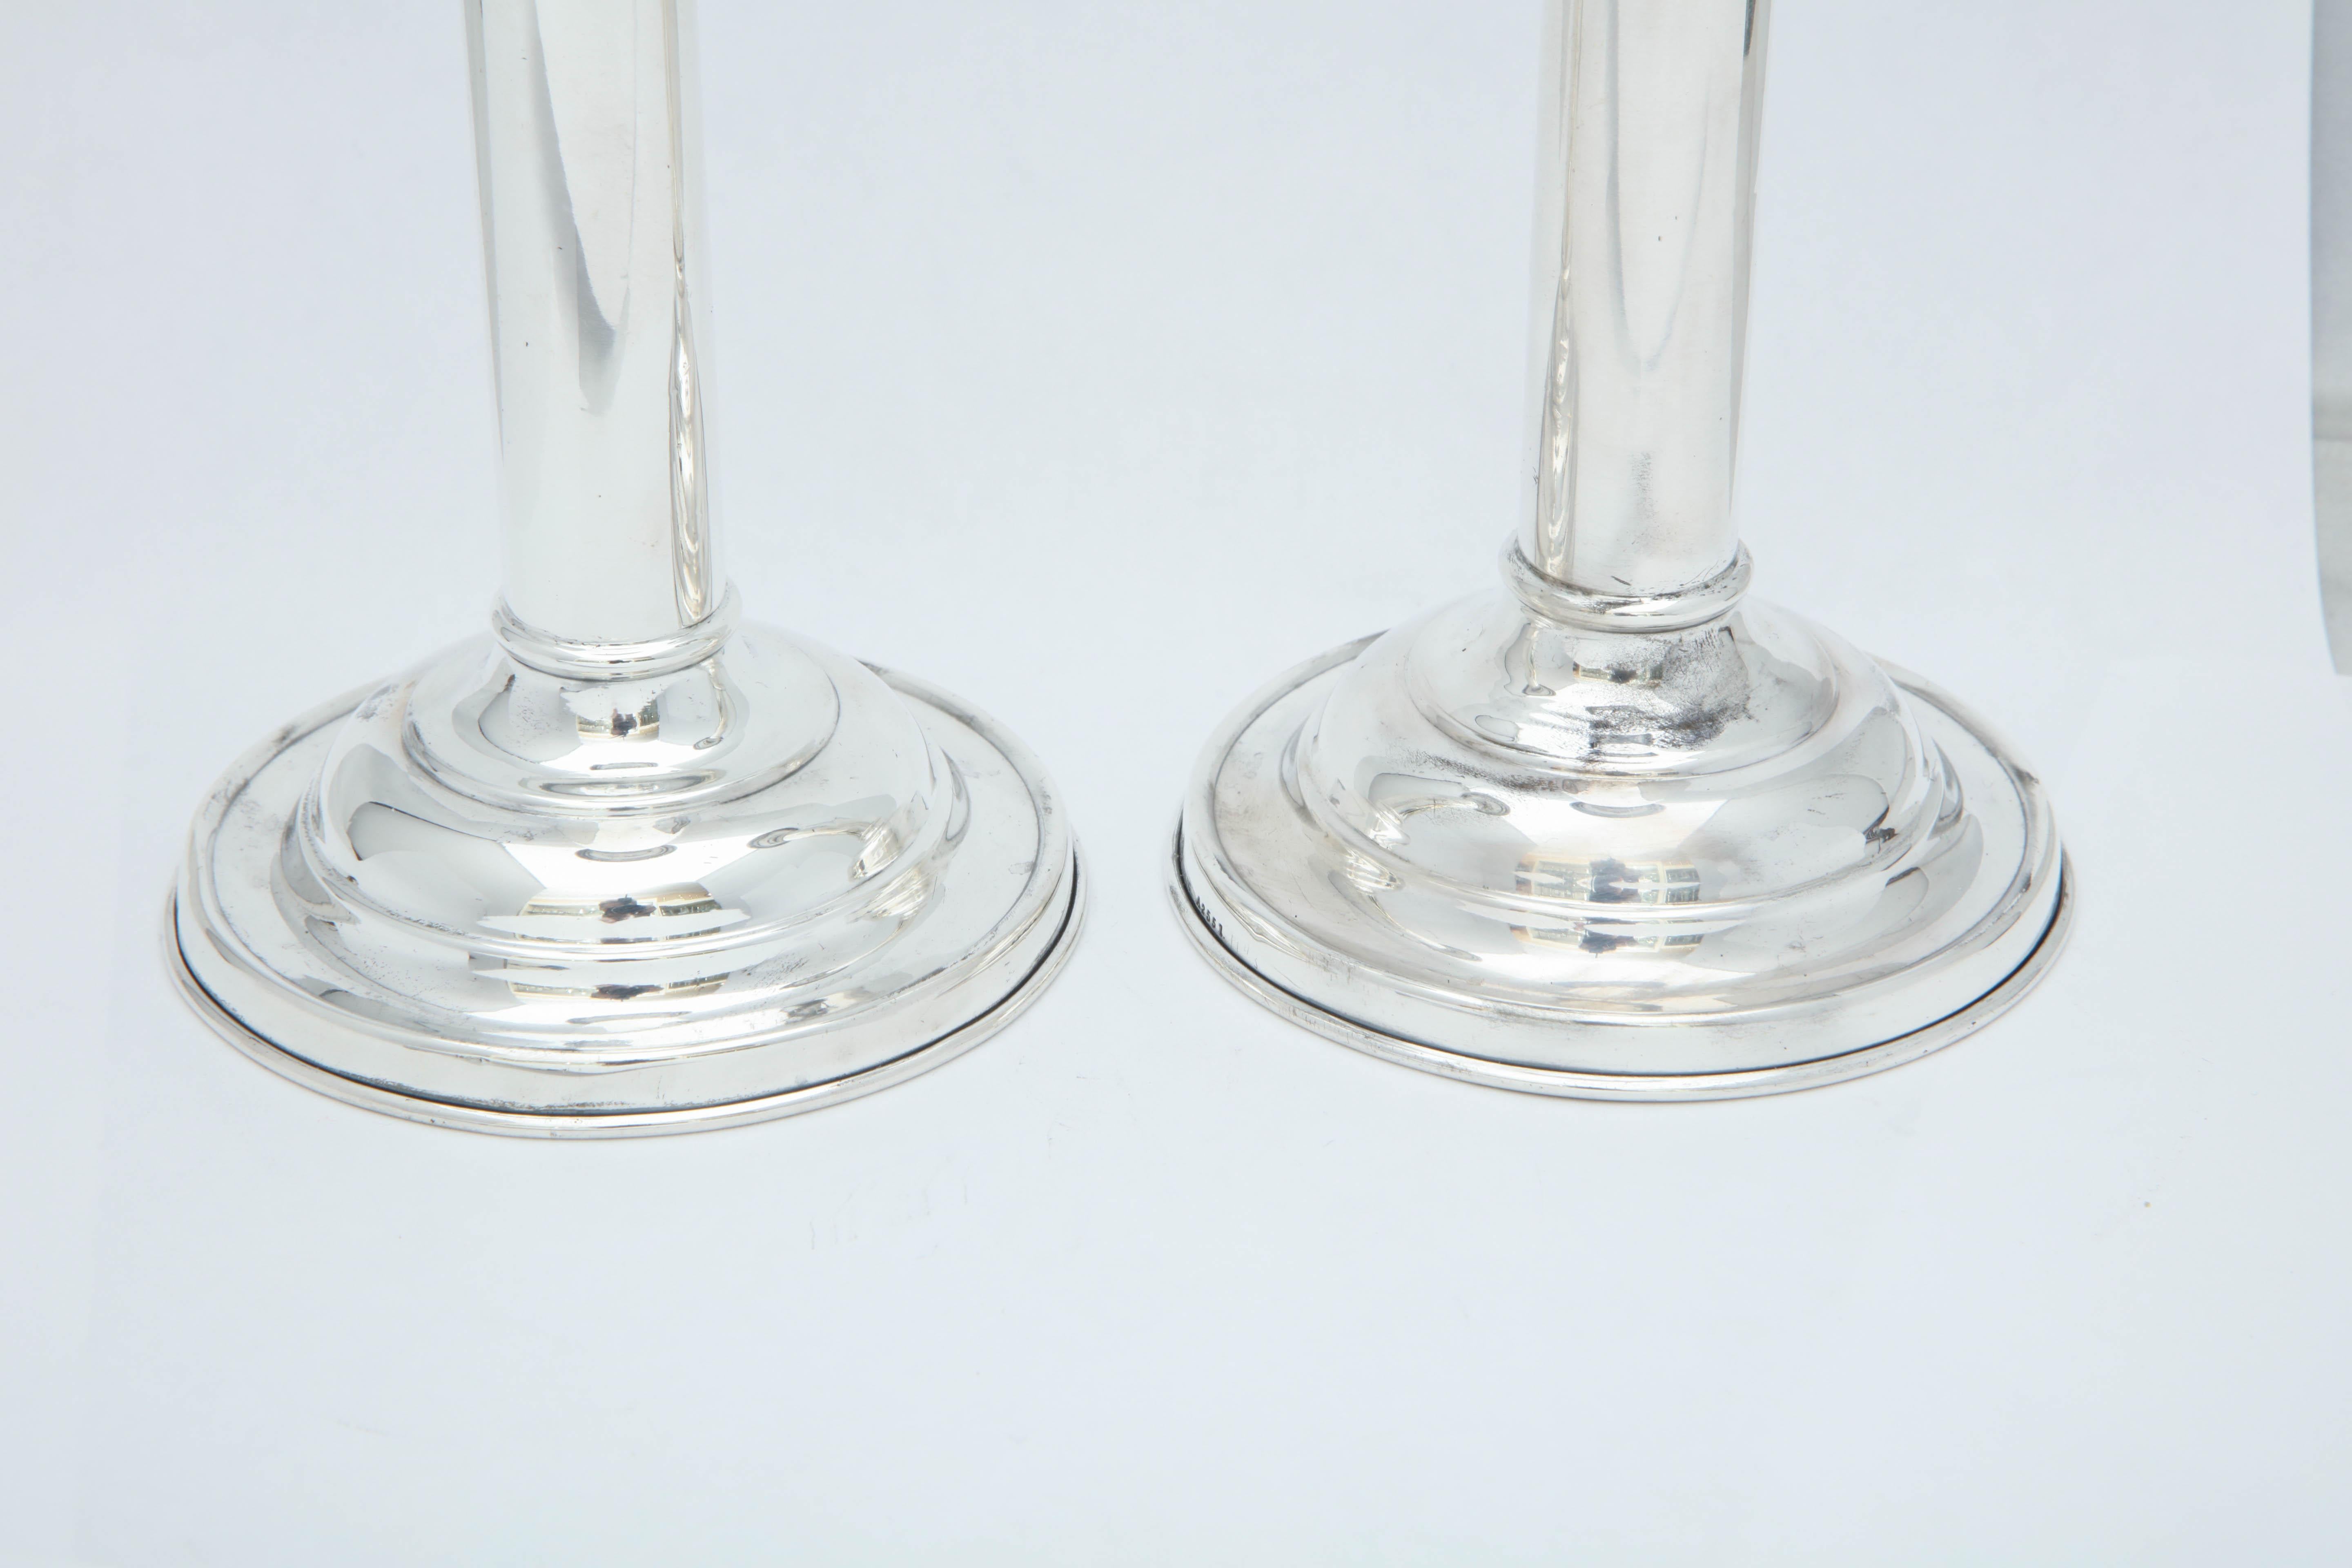 Edwardian pair of sterling silver candlesticks, The Gorham Manufacturing Company, Providence, Rhode Island, circa 1910. Clean lines. Each measures 7 inches high x 3 3/4 inches in diameter across base. Weighted. Dark spots in photos are reflections.